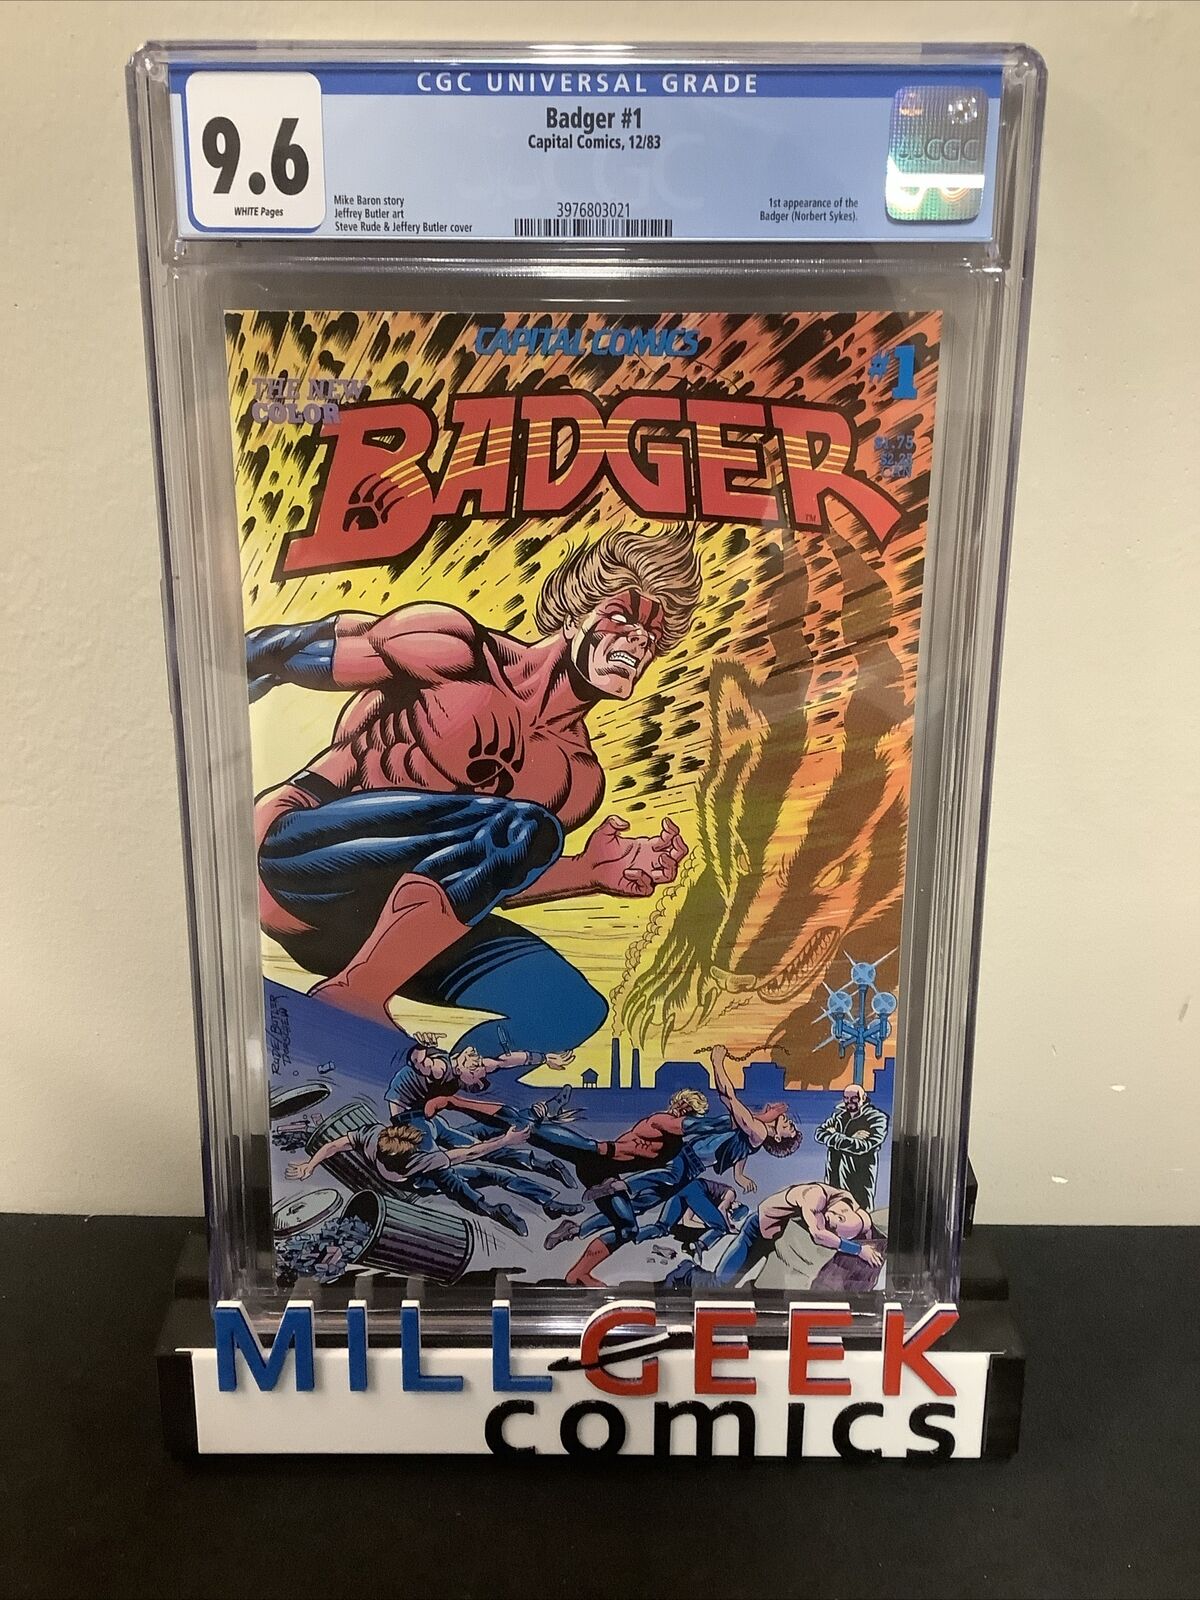 Badger #1, CGC Graded 9.6, Capital Comics, 1st Appearance Of The Badger, 1983